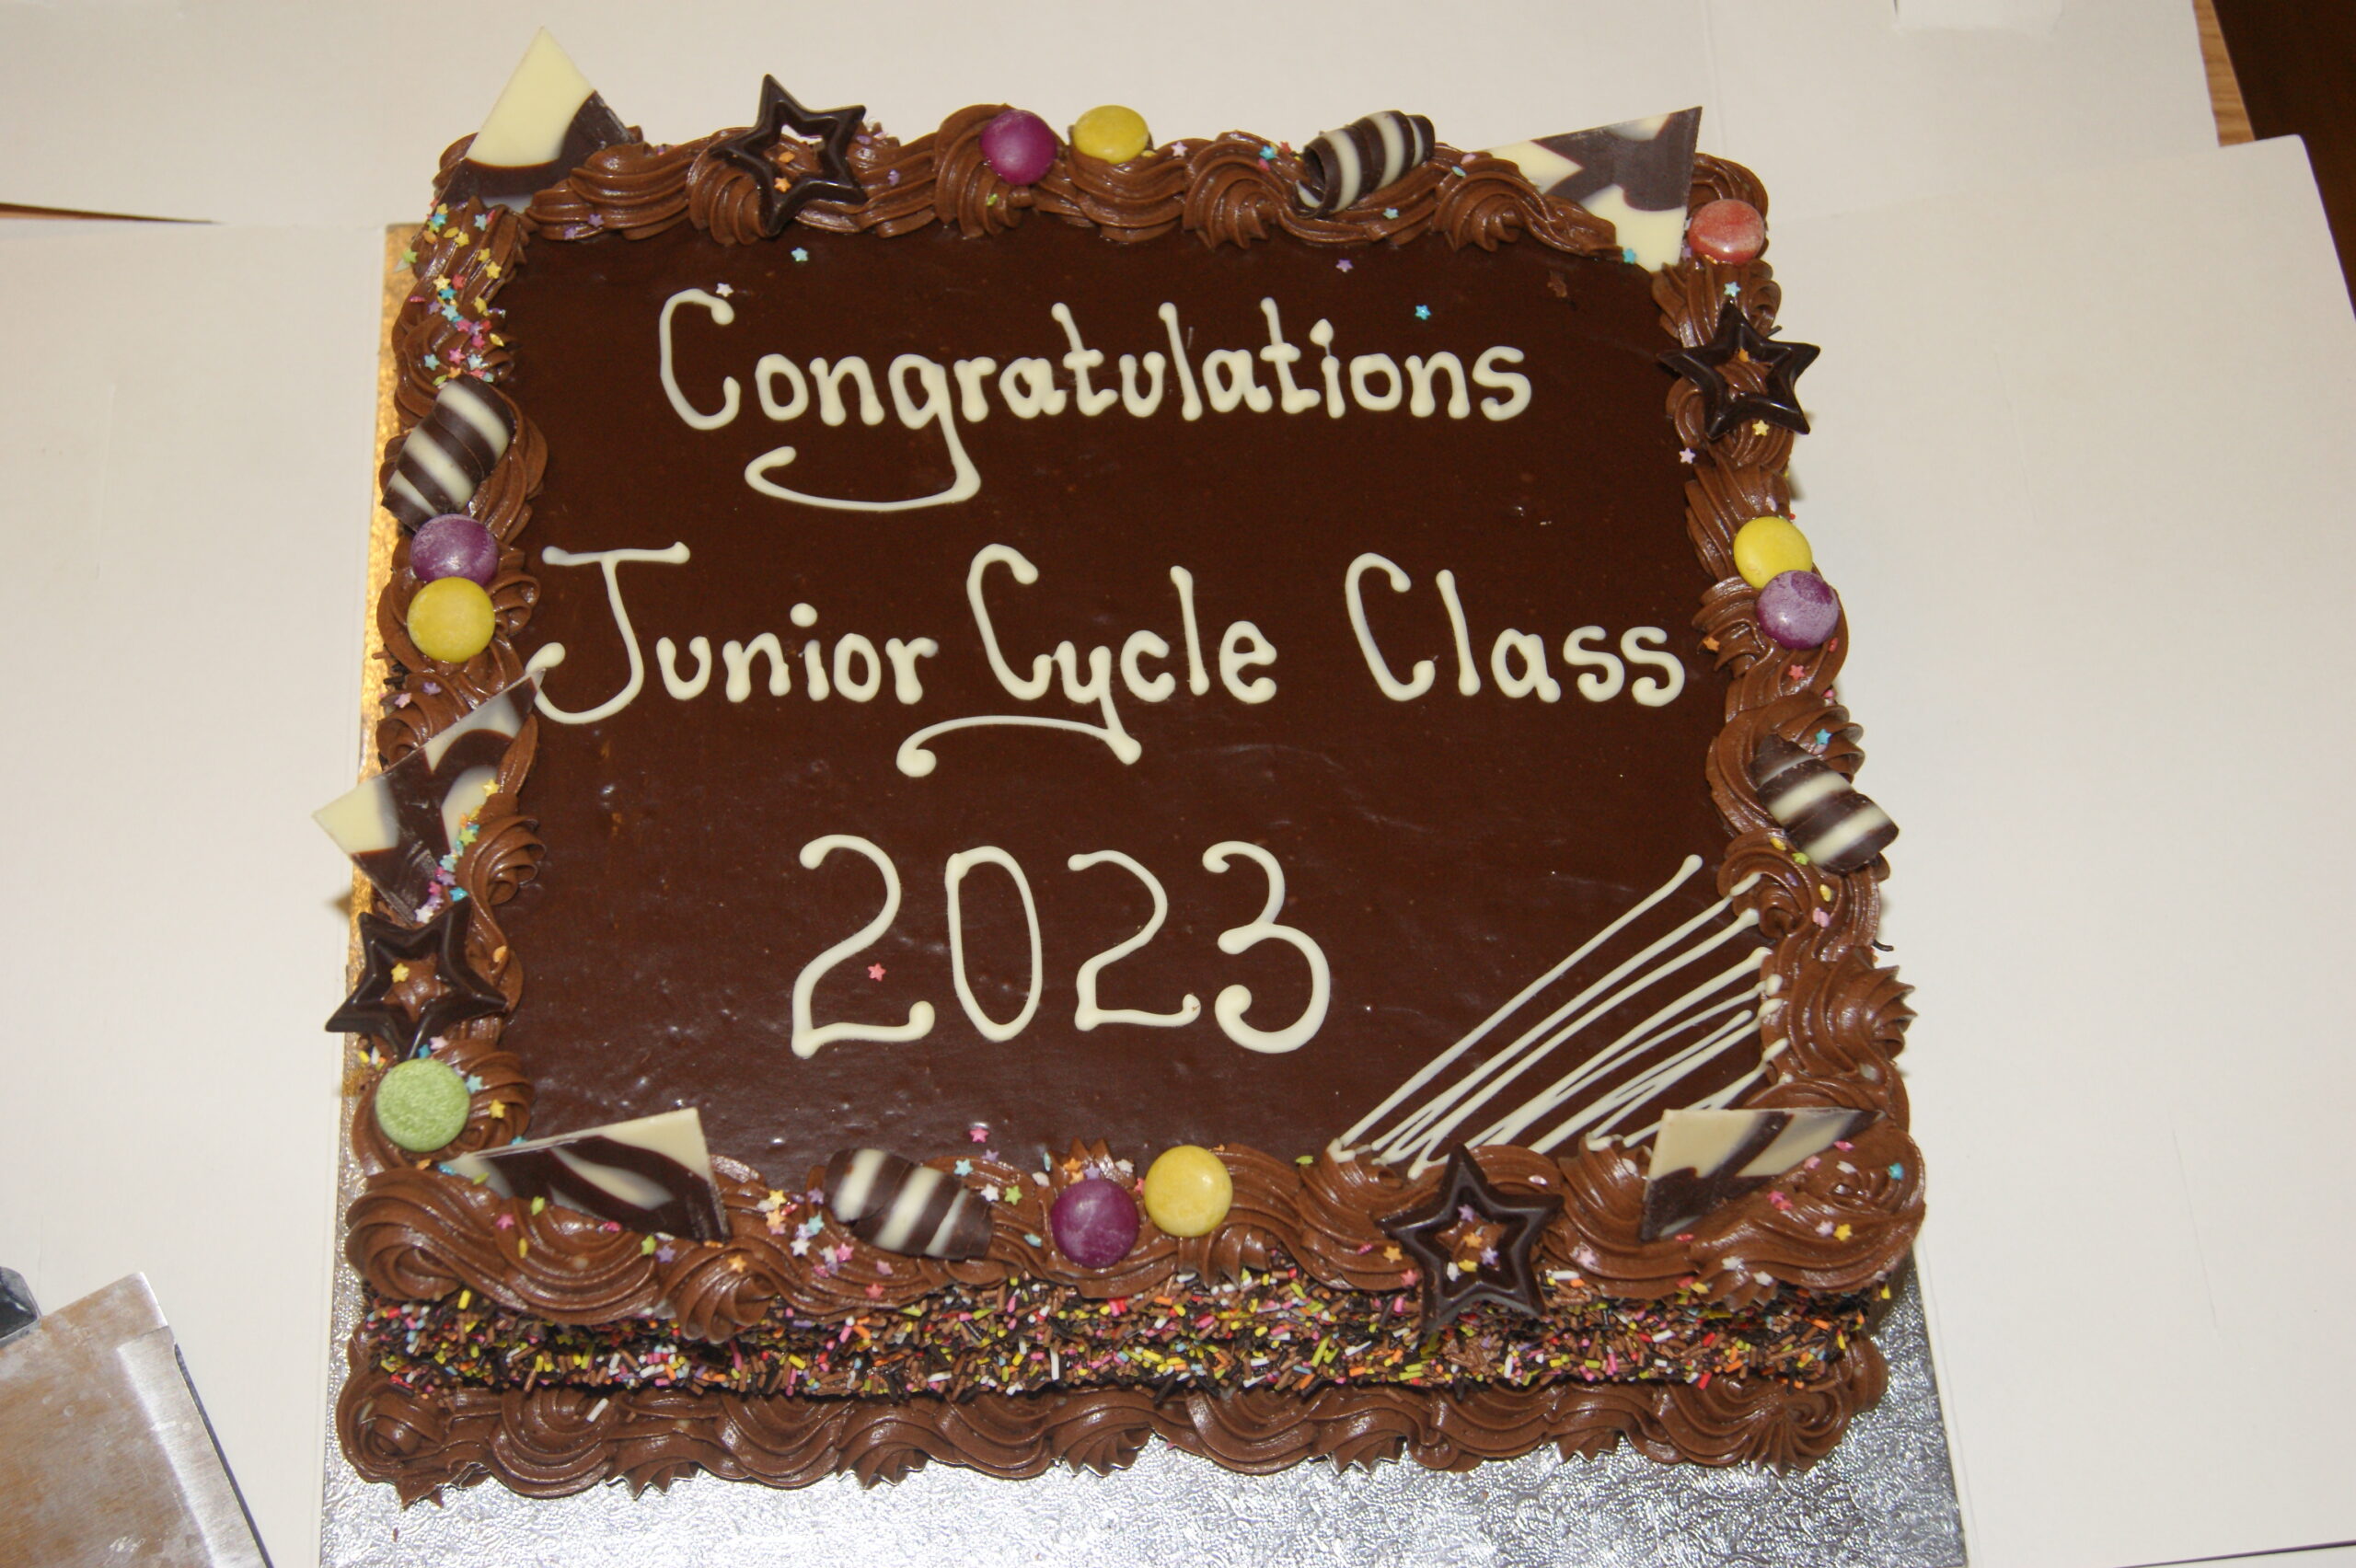 Junior Cycle Results 2023